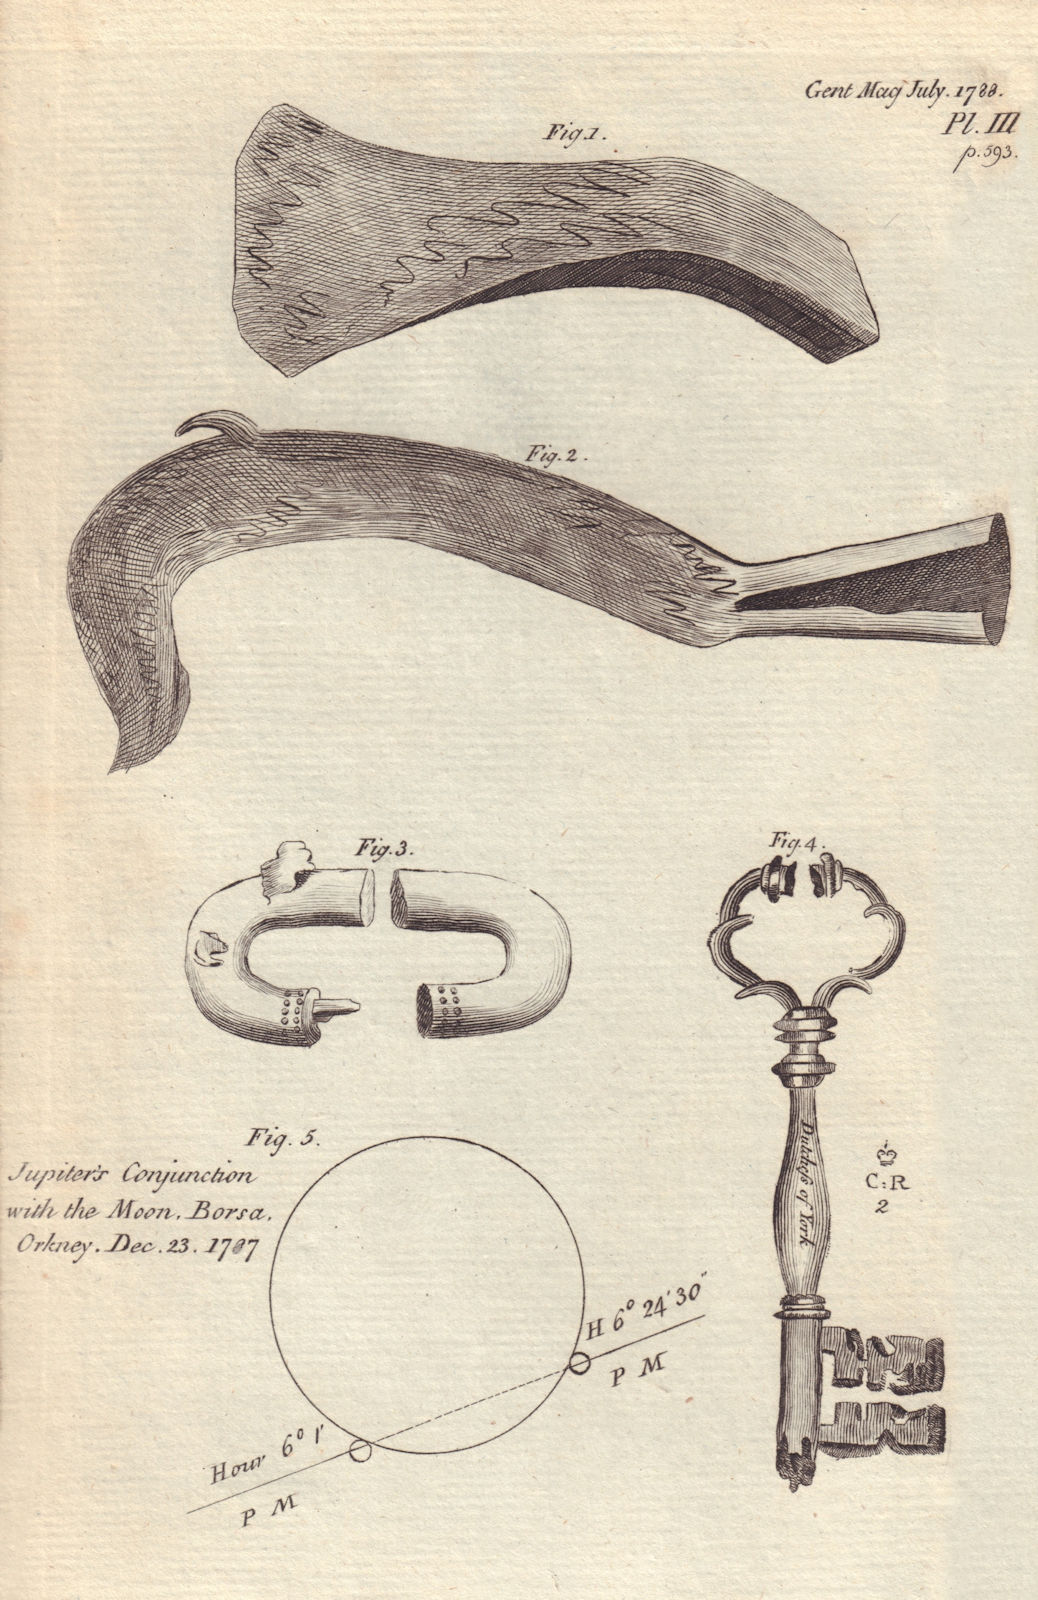 Ancient weapons, Lound, Suffolk. Ely Chapel Key London. Astronomical Figure 1788